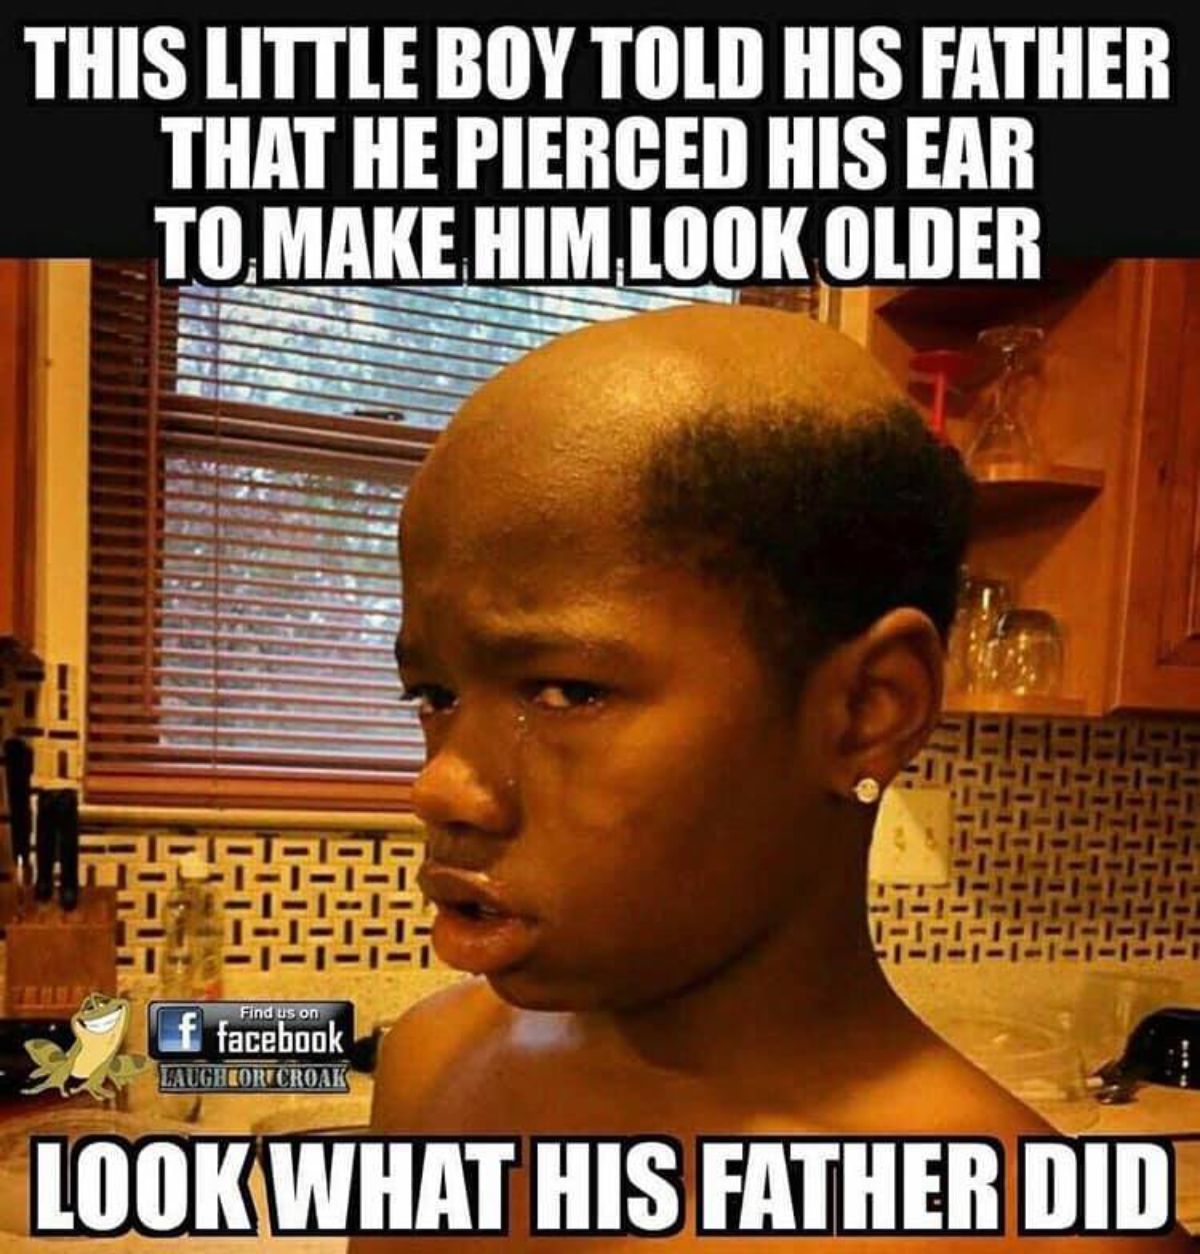 grown man haircut meme - This Little Boy Told His Father That He Pierced His Ear To Make Him.Look Older Find us on f facebook Laugh Or Croak Look What His Father Did